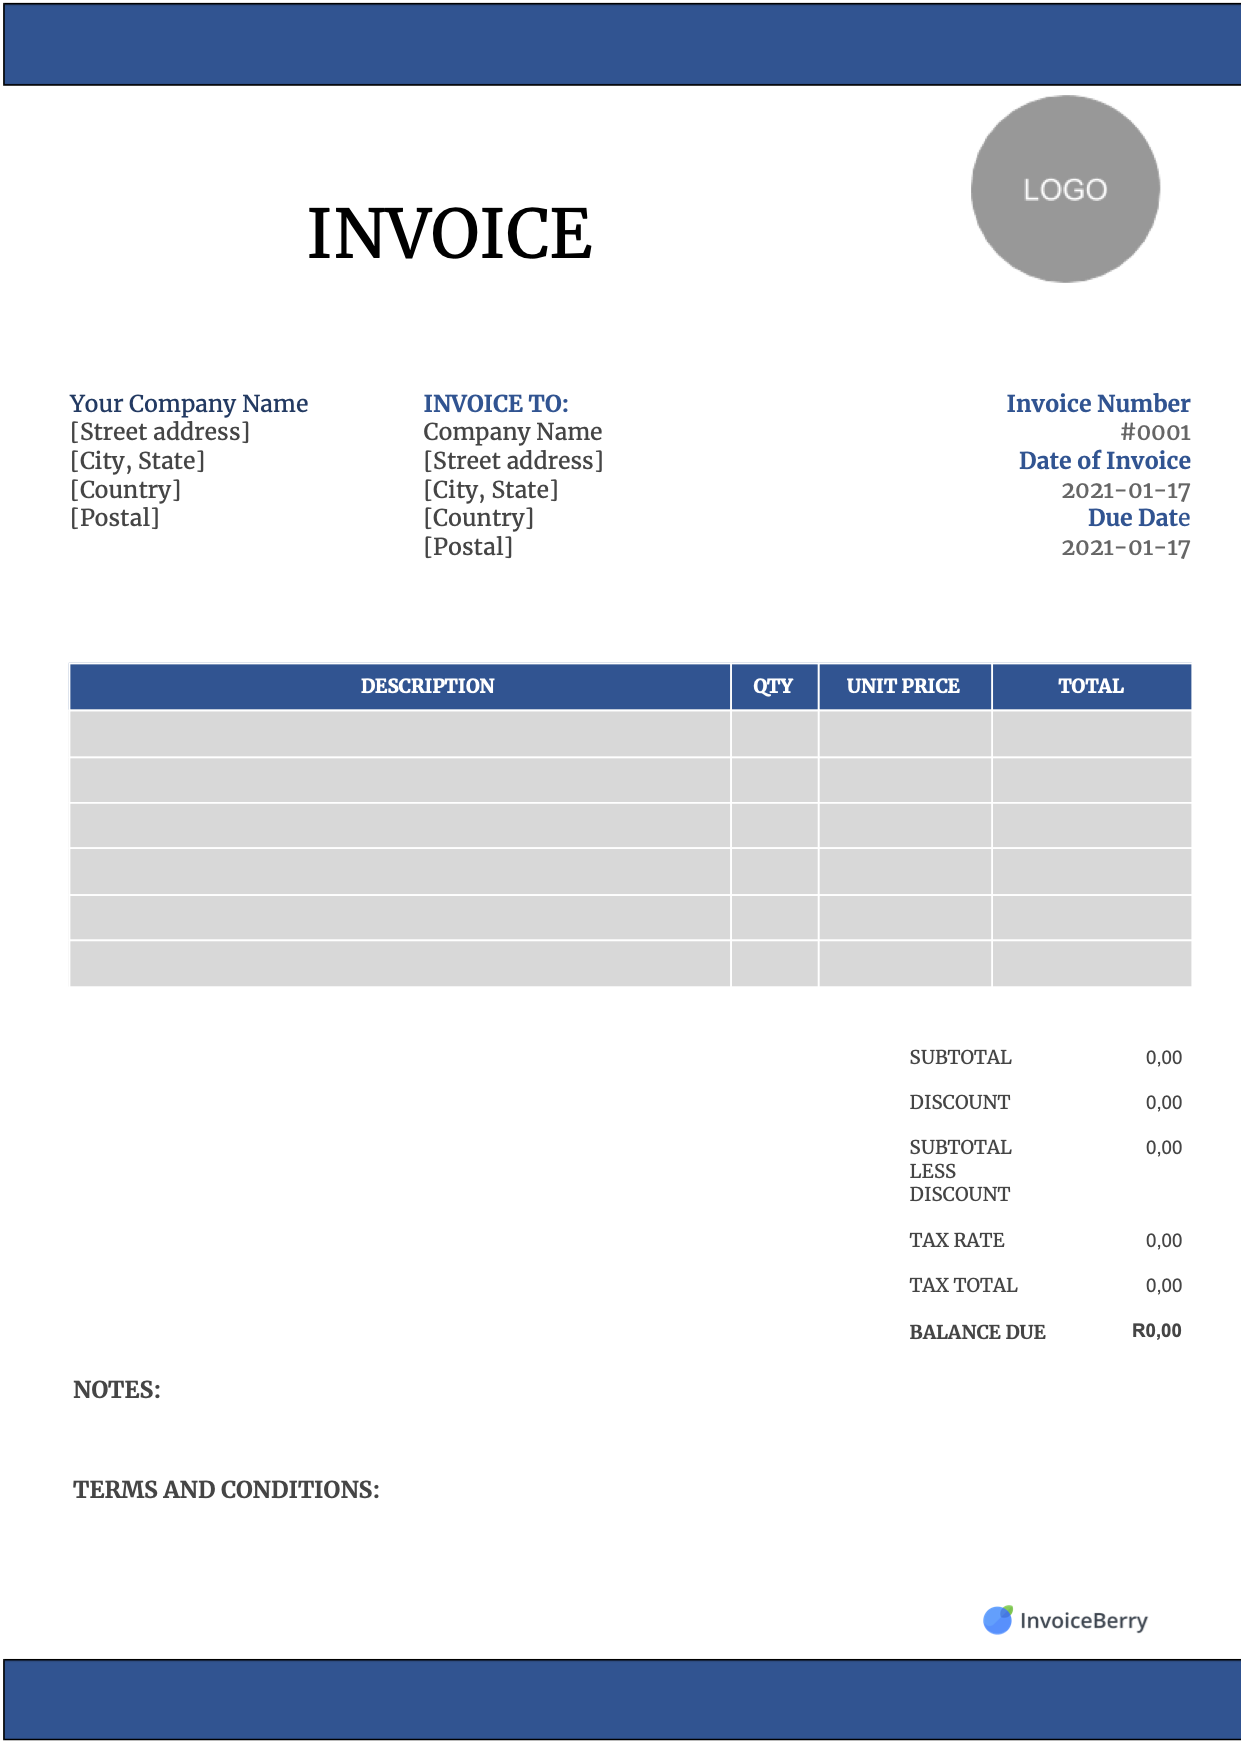 Free Invoice Templates Download - All Formats and Industries Intended For Free Downloadable Invoice Template For Word